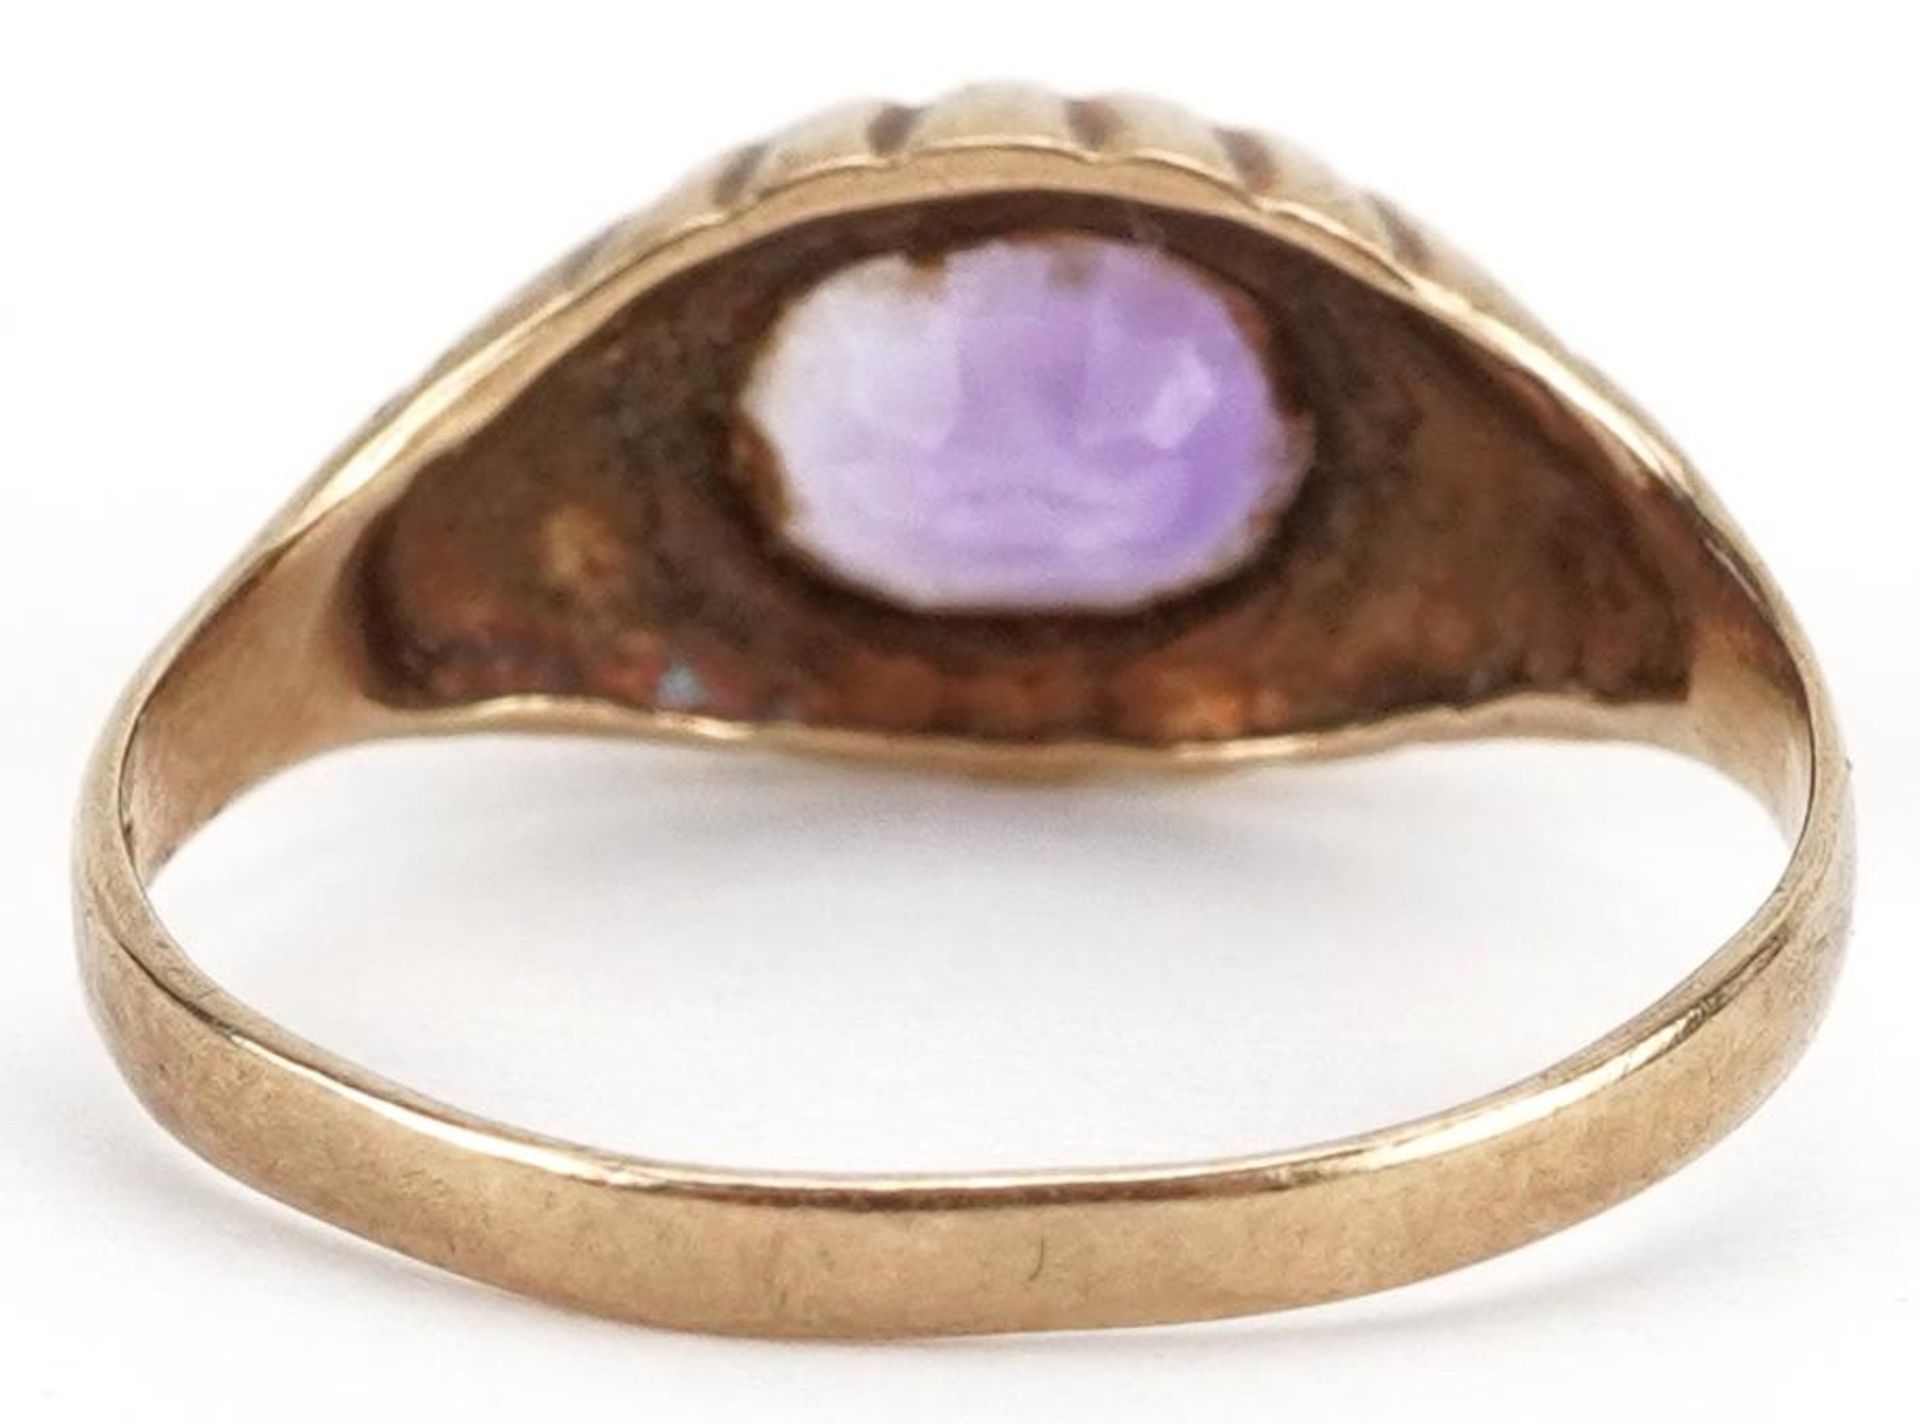 9ct gold oval amethyst ring with ornate setting, size K, 2.0g - Image 2 of 5